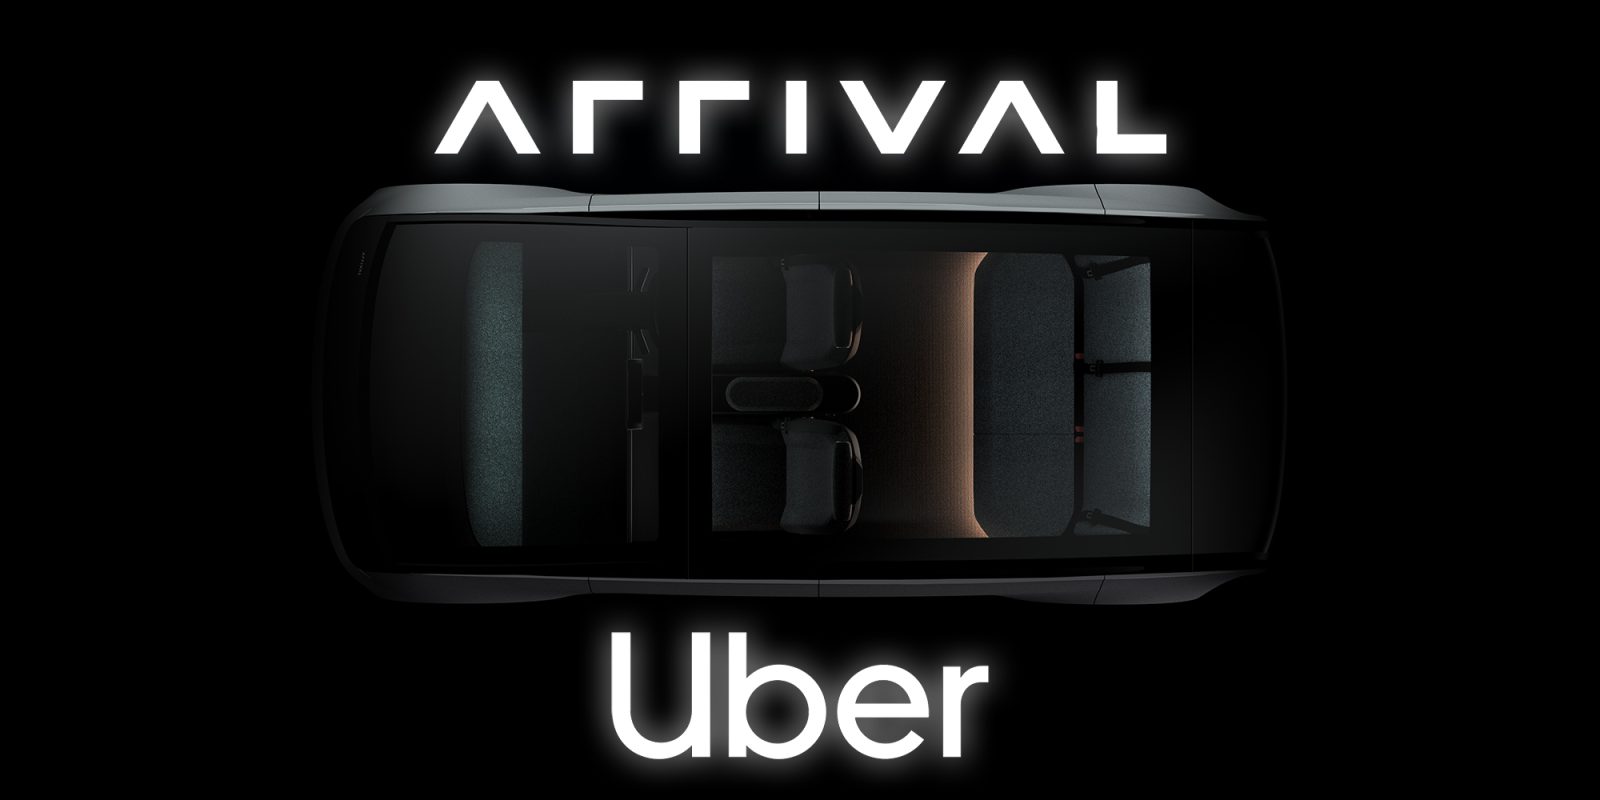 Arrival partners with Uber to design an EV for ride-share drivers